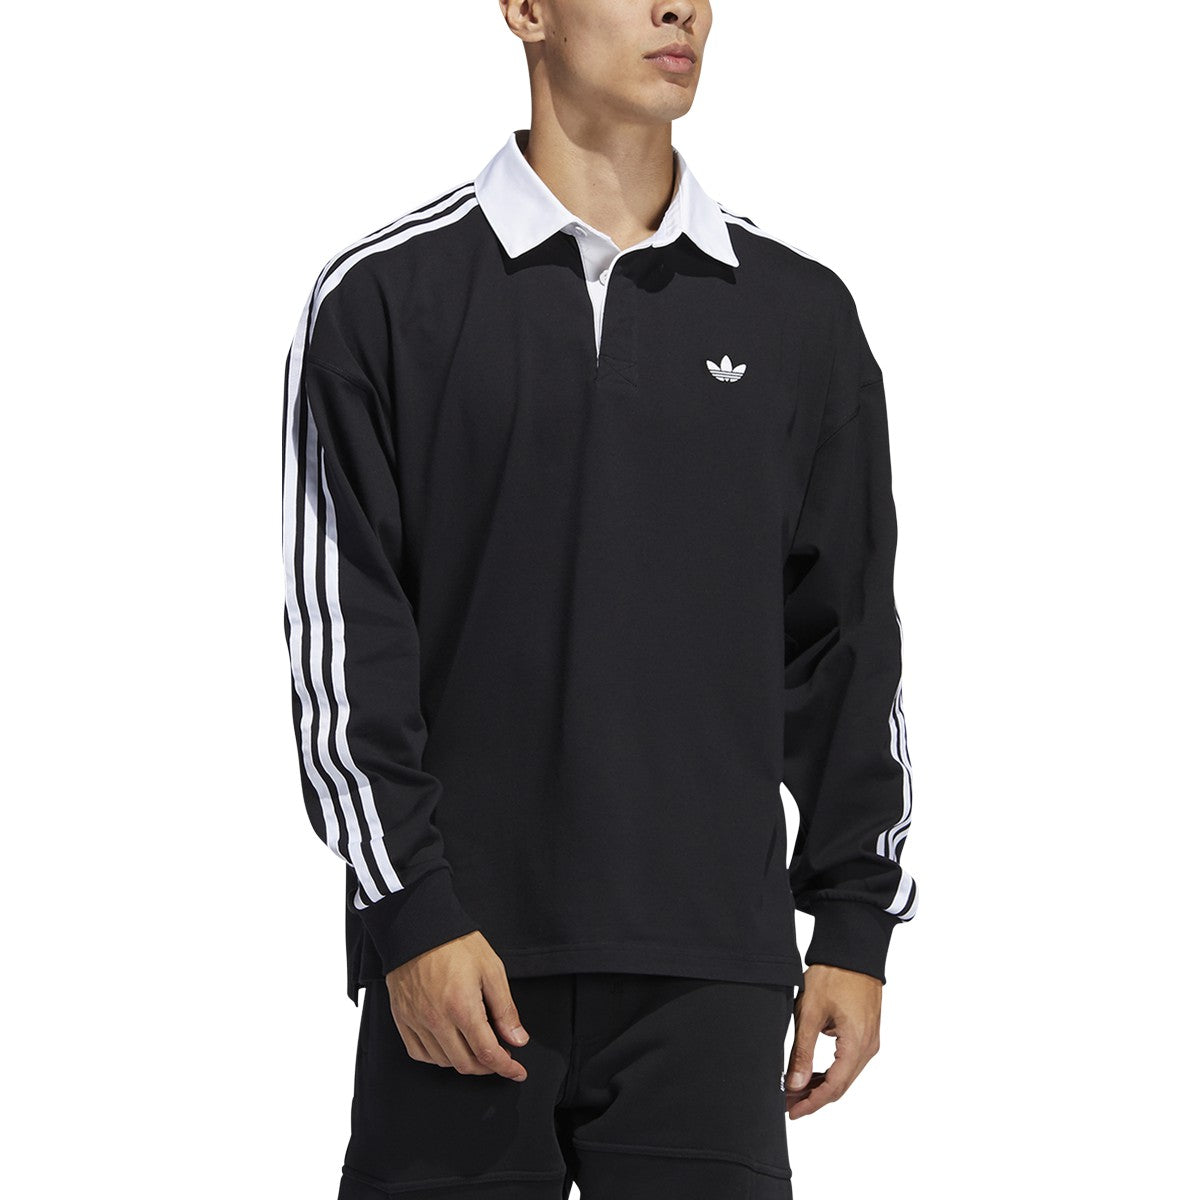 Black/White Adidas Solid Rugby Shirt